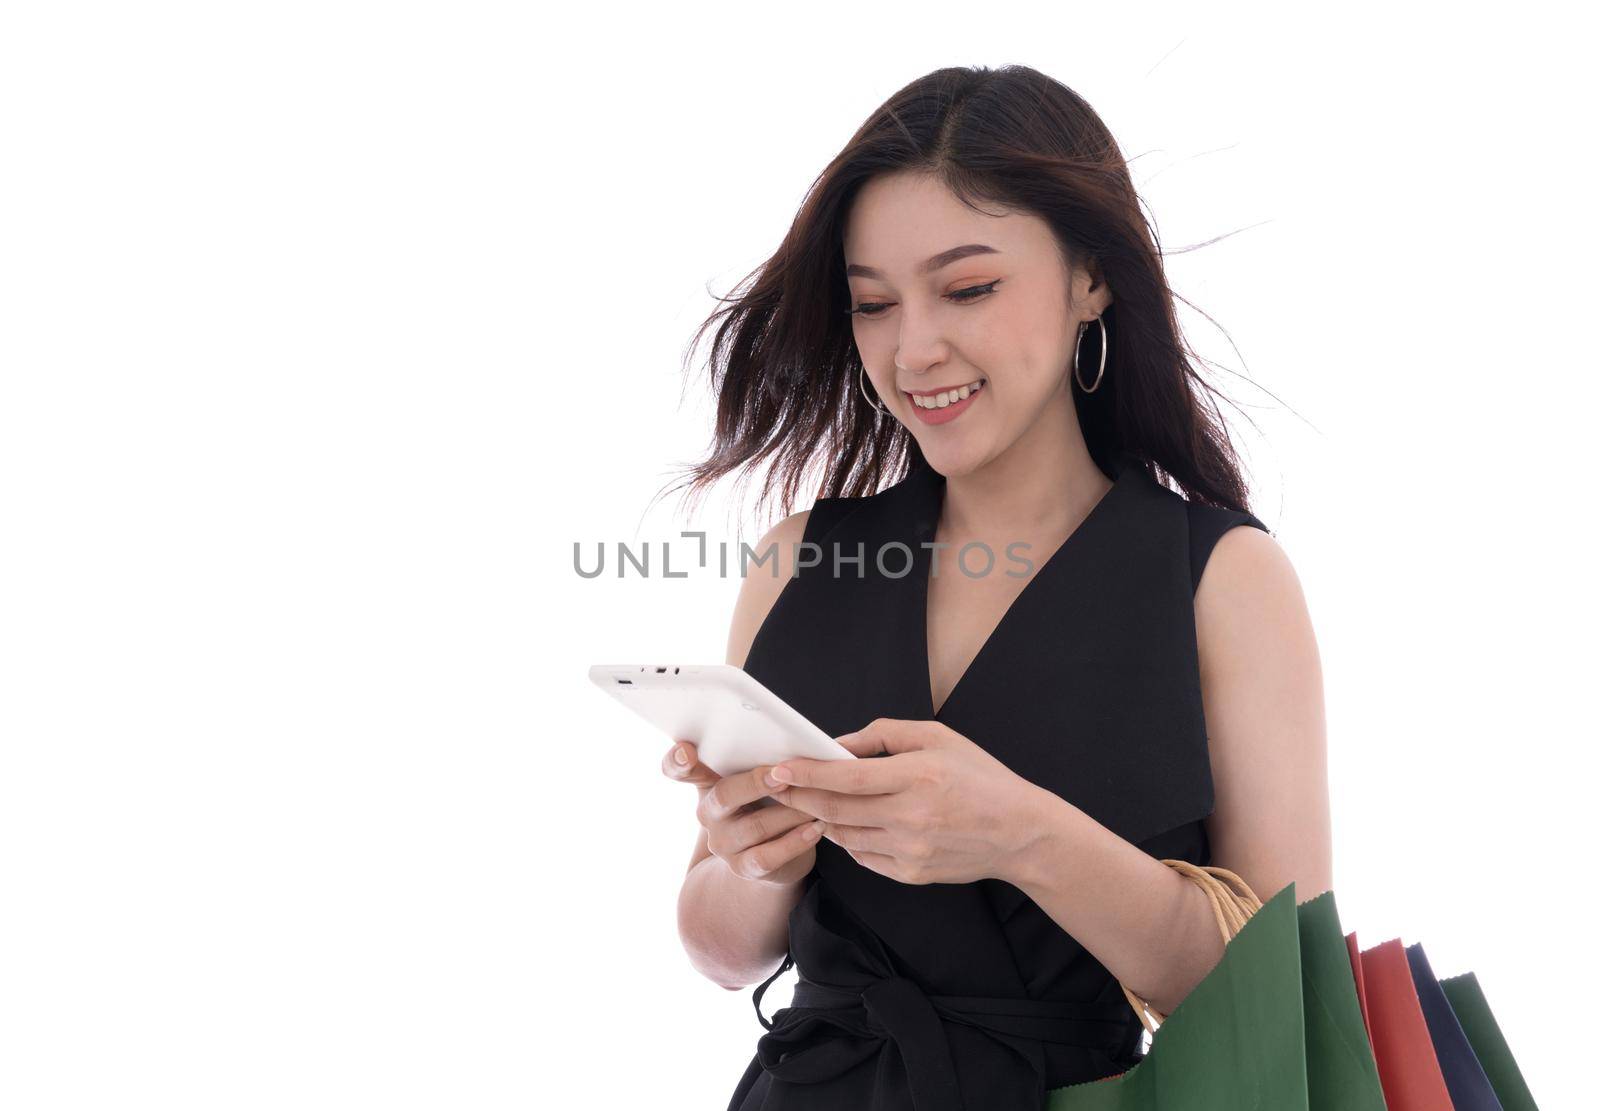 young woman shopping and using digital tablet isolated on a white background